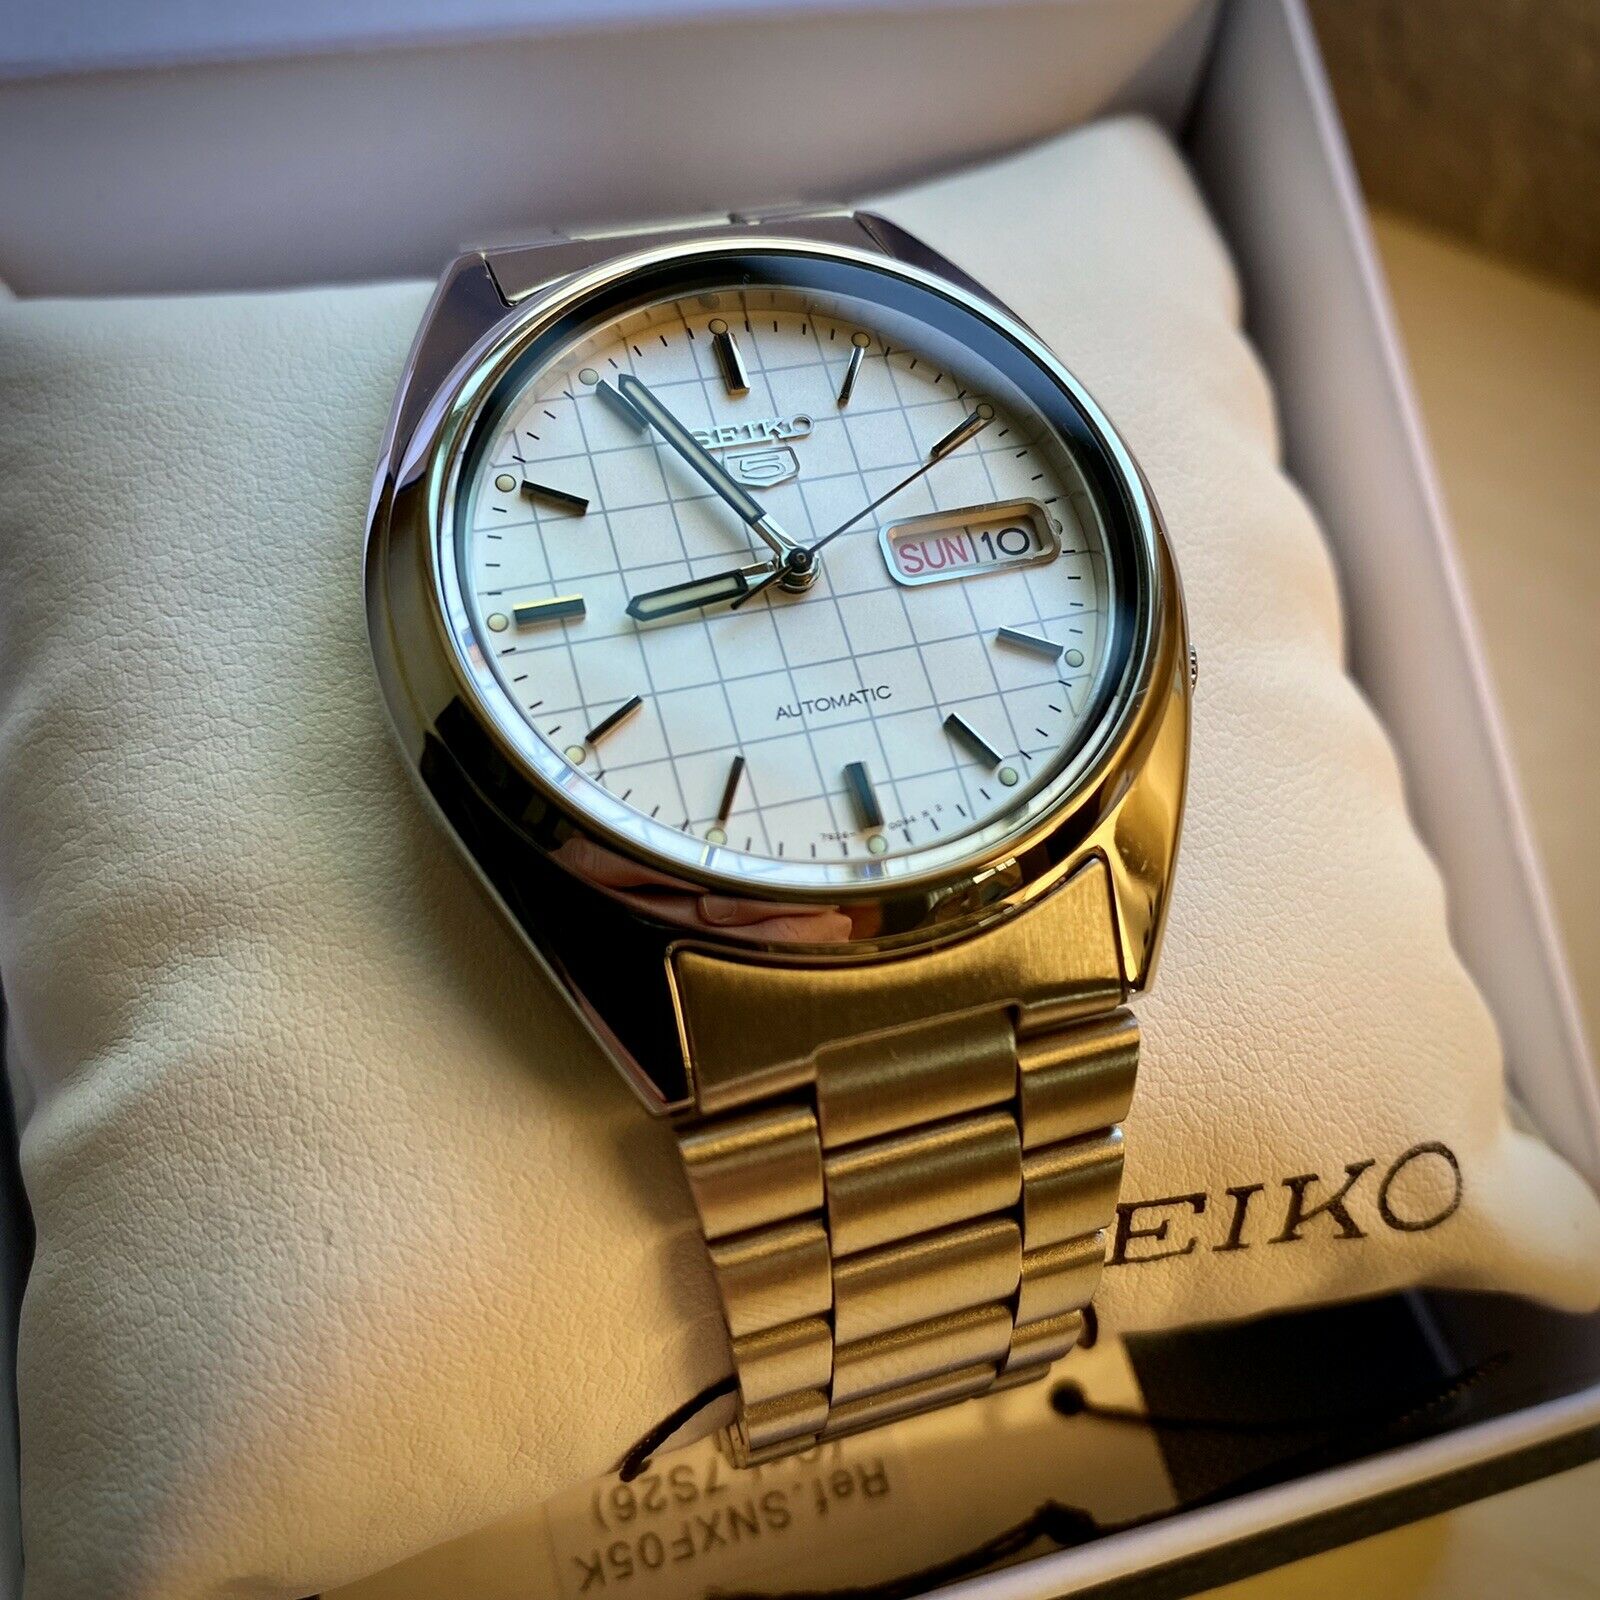 Seiko 5 SNXF05 Rare White Grid Dial with Day Date Automatic for $159 for  sale from a Seller on Chrono24